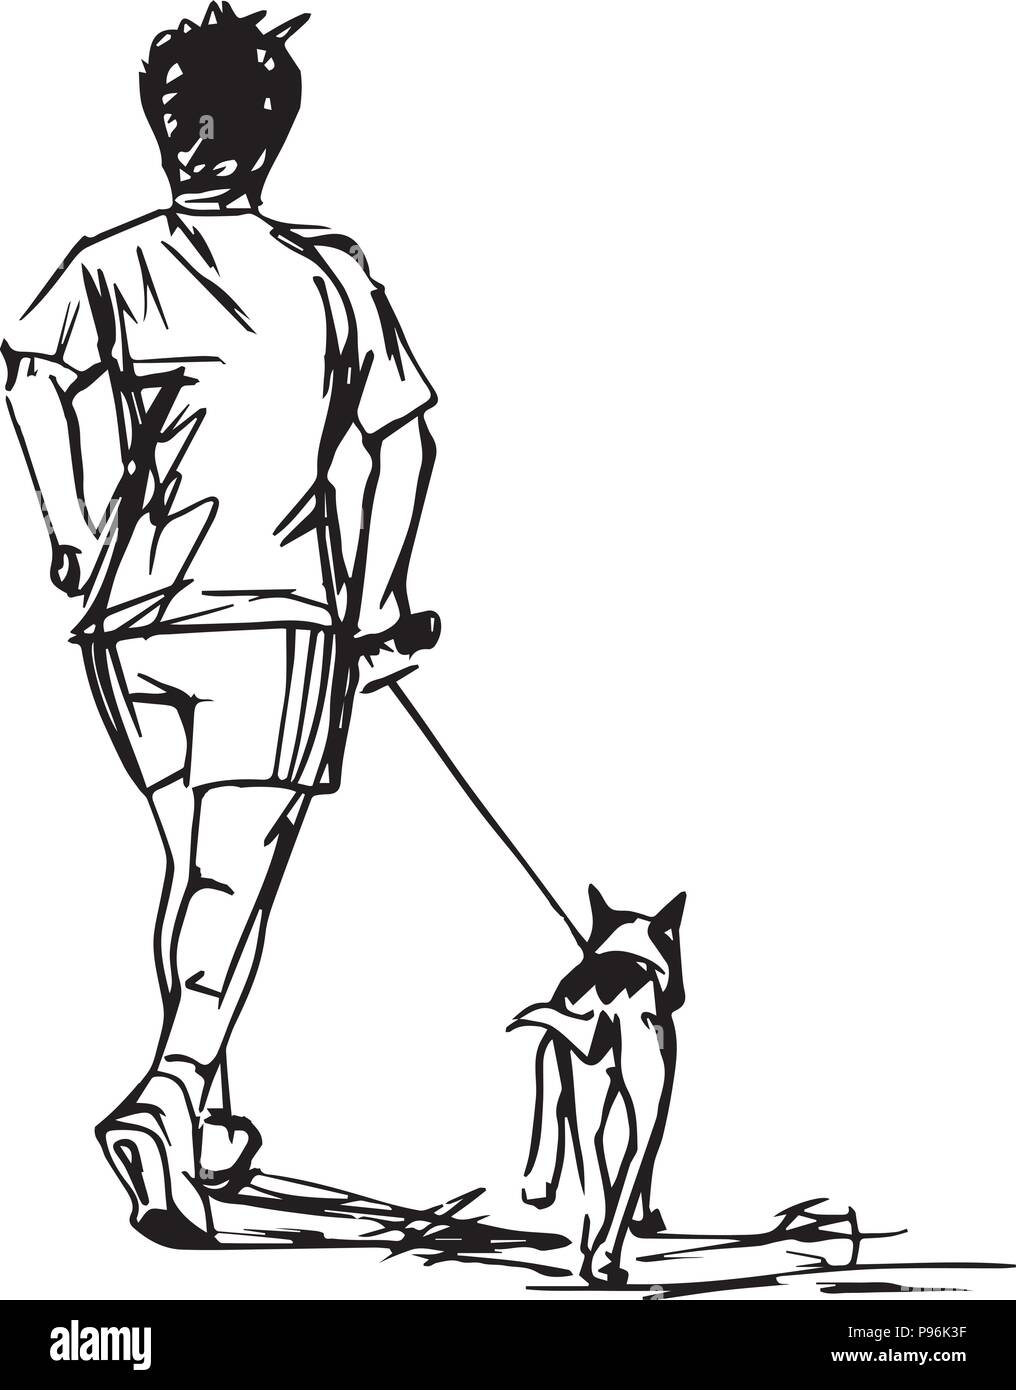 Sketch of Runner with Dog vector illustration Stock Vector